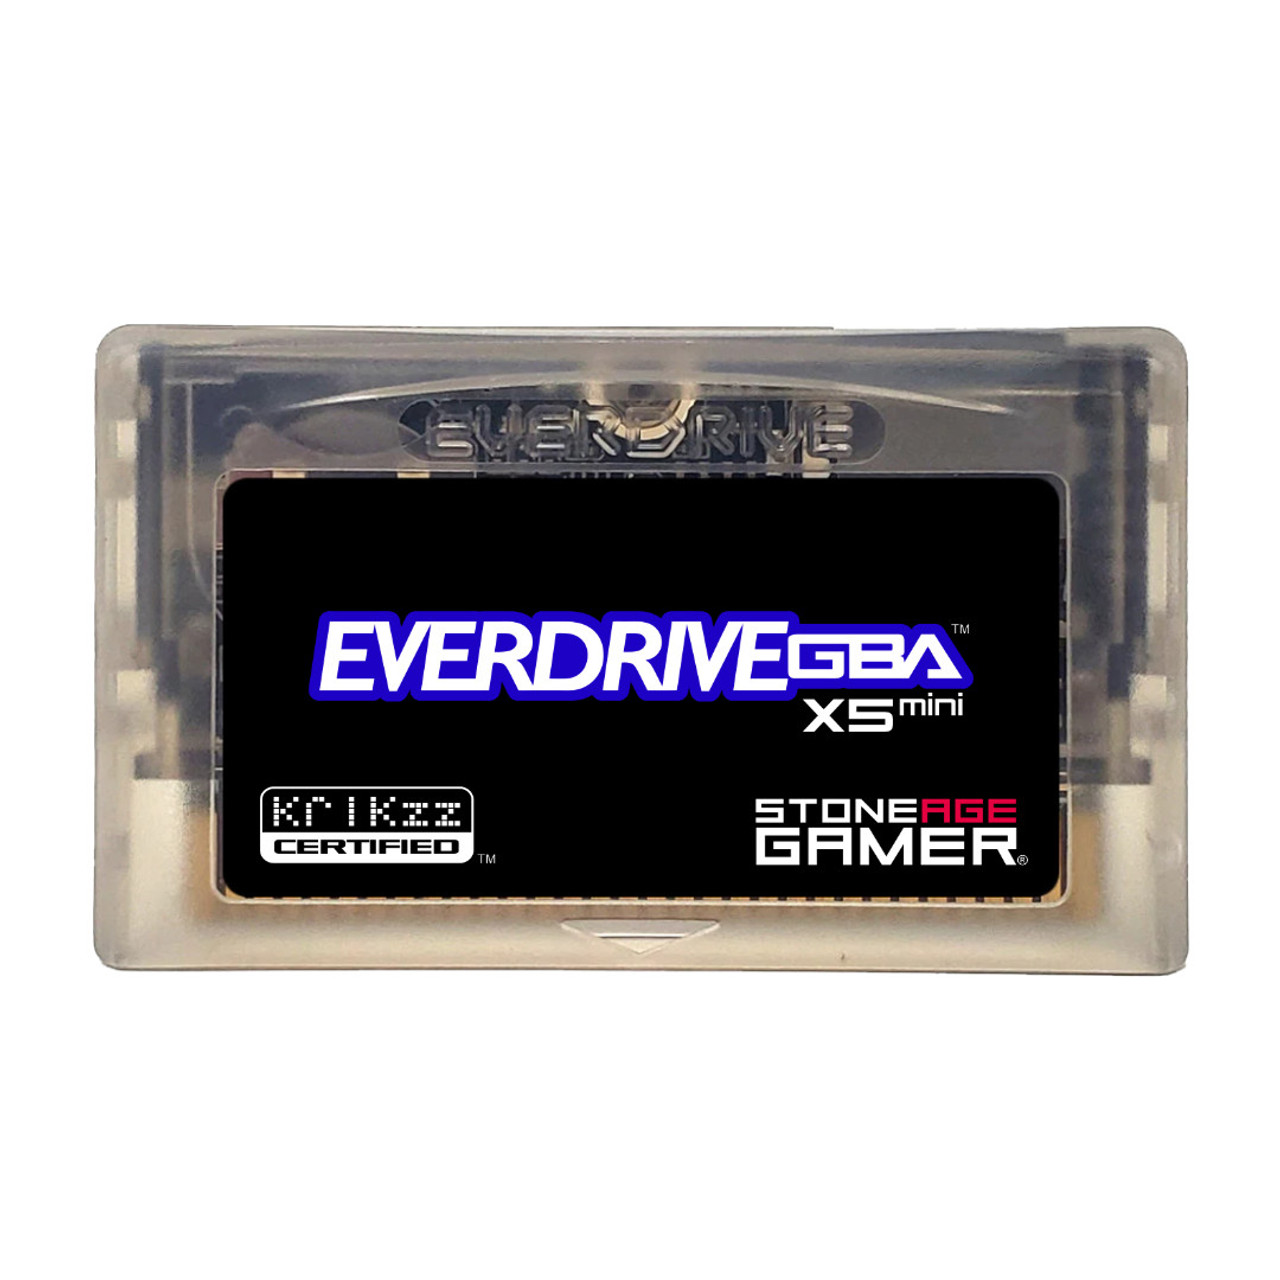 The Everdrive GBA X5 Complete Game Library Set 